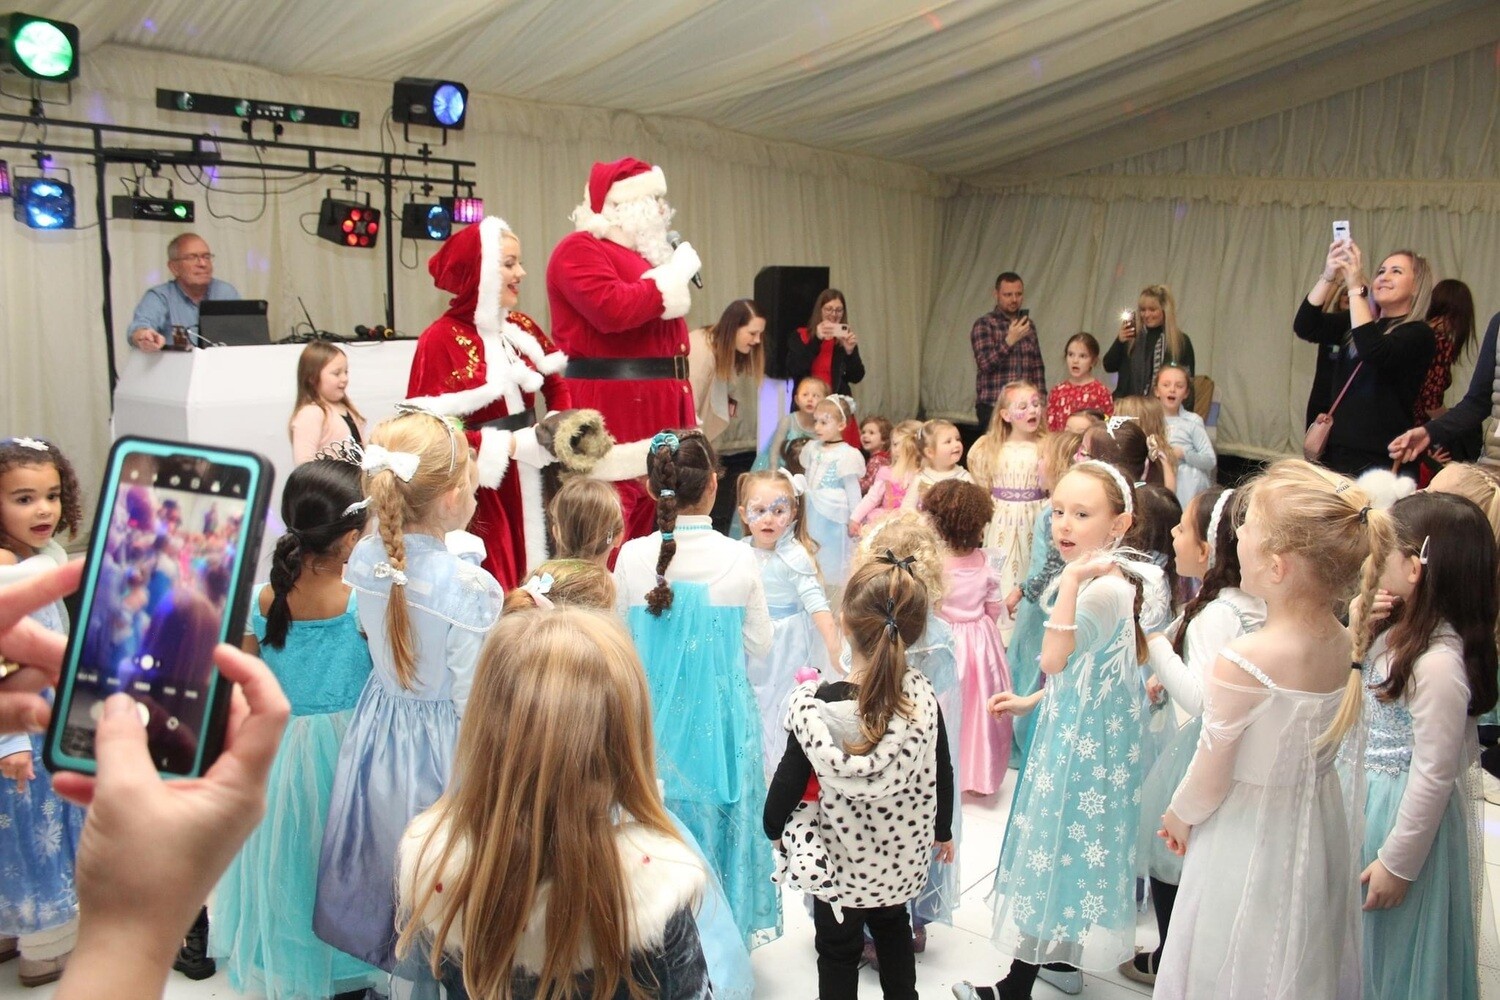 EARLY BIRD DISCOUNT - Winter Ball- Sun 10th Dec 2pm- Family of 4 (2 ad 2 child)